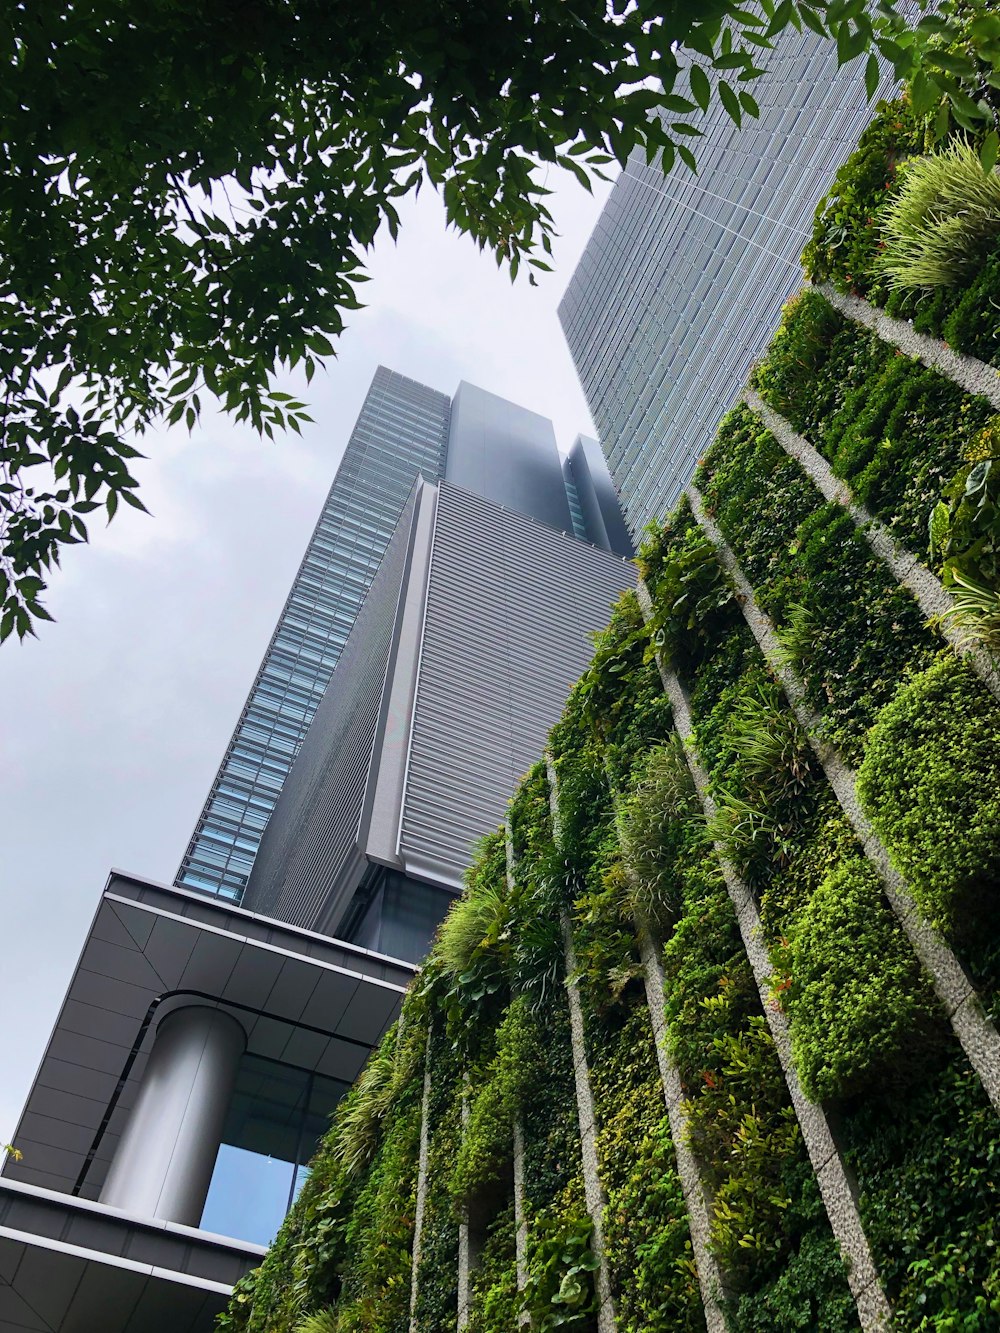 a very tall building with a lot of plants growing on it